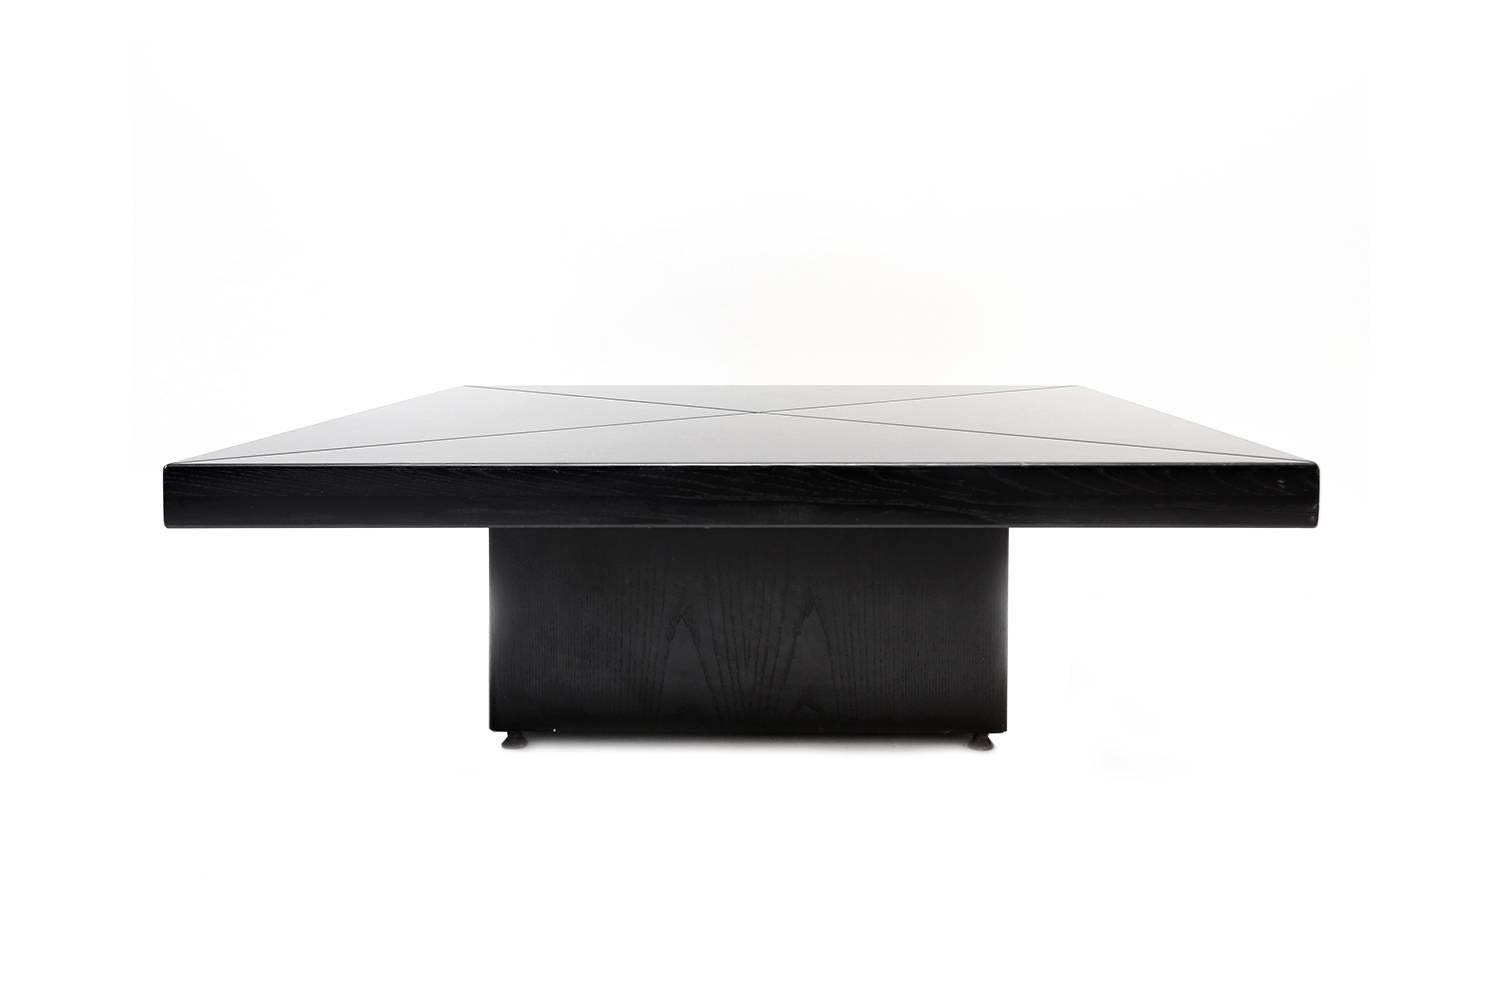 Hollywood Regency Mid-Century Modern coffee table with sliding panels
Black lacquered wood hides a burl veneer
A play of triangles and squares
Willy Rizzo style
Italy, 1970s.
Measures: L 110 cm, W 110 cm, H 36 cm, Open: 147 cm x 147 cm.